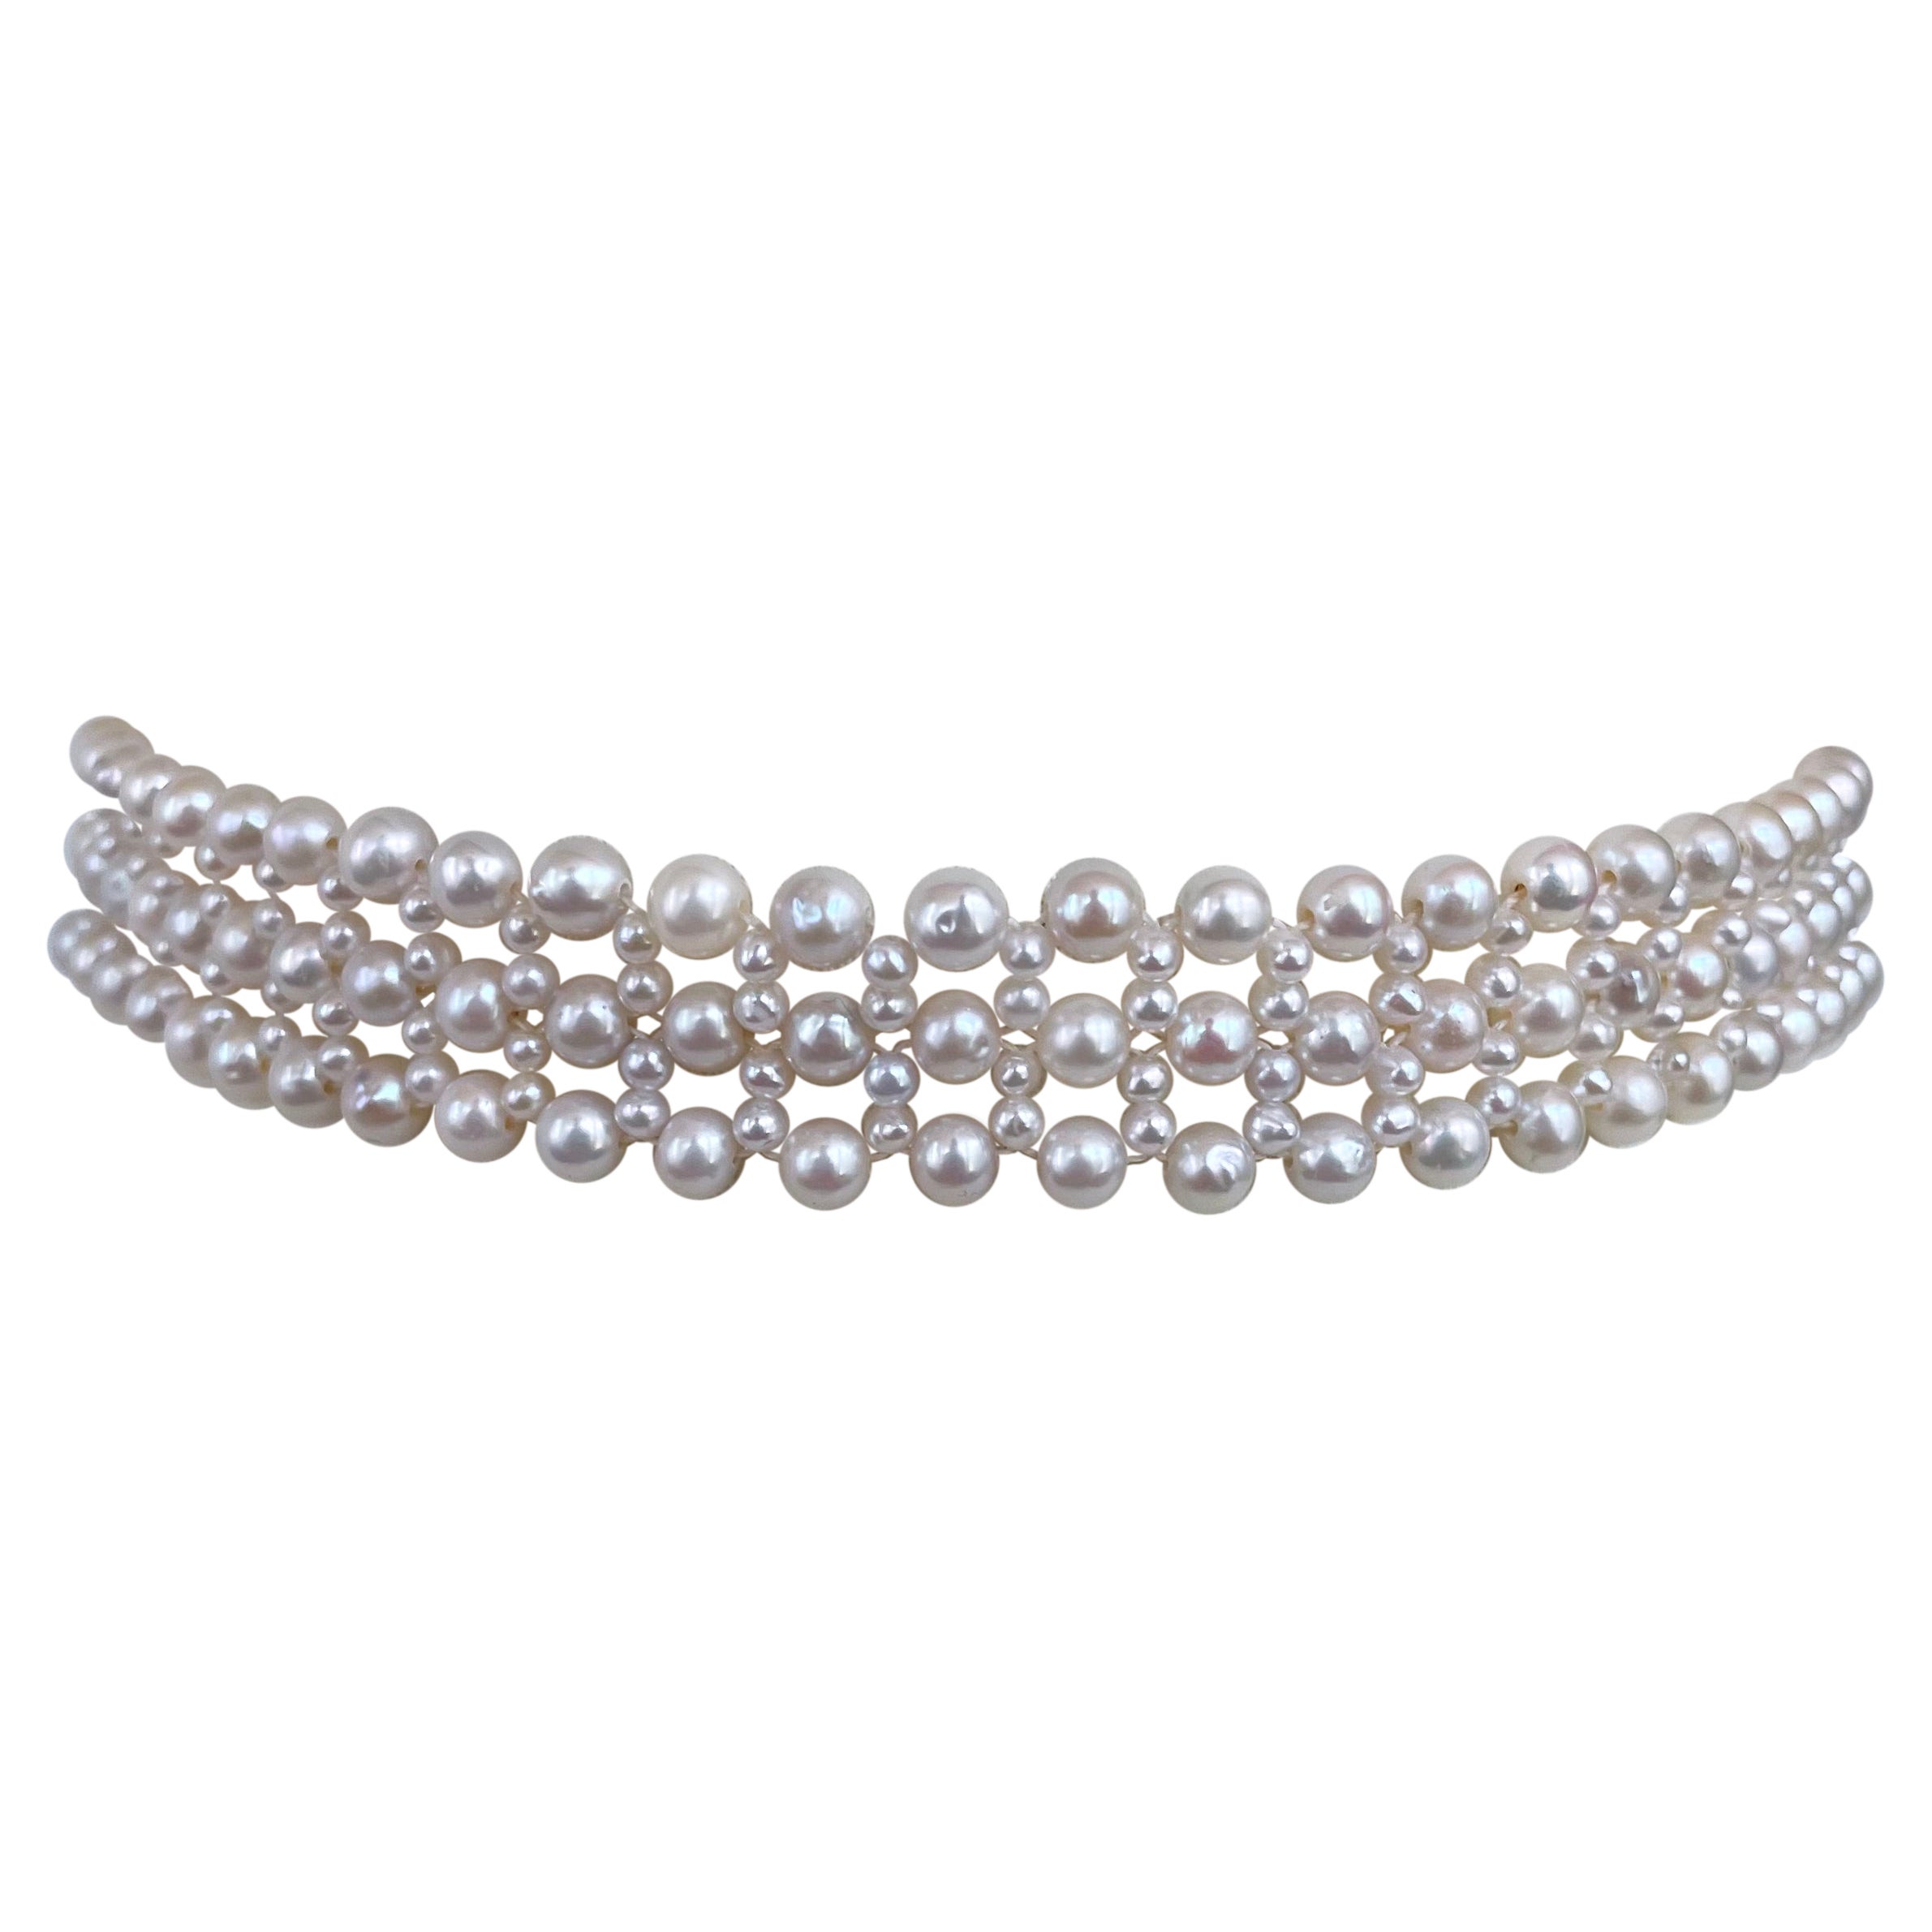 Classic and elegant Pearl woven choker for the modern woman - by Marina J. This piece features 2.5mm, 4.5mm and 5mm cultured White Pearls all intricately woven into a beautiful lace like design. Measuring half an inch thick and 13 inches long, this